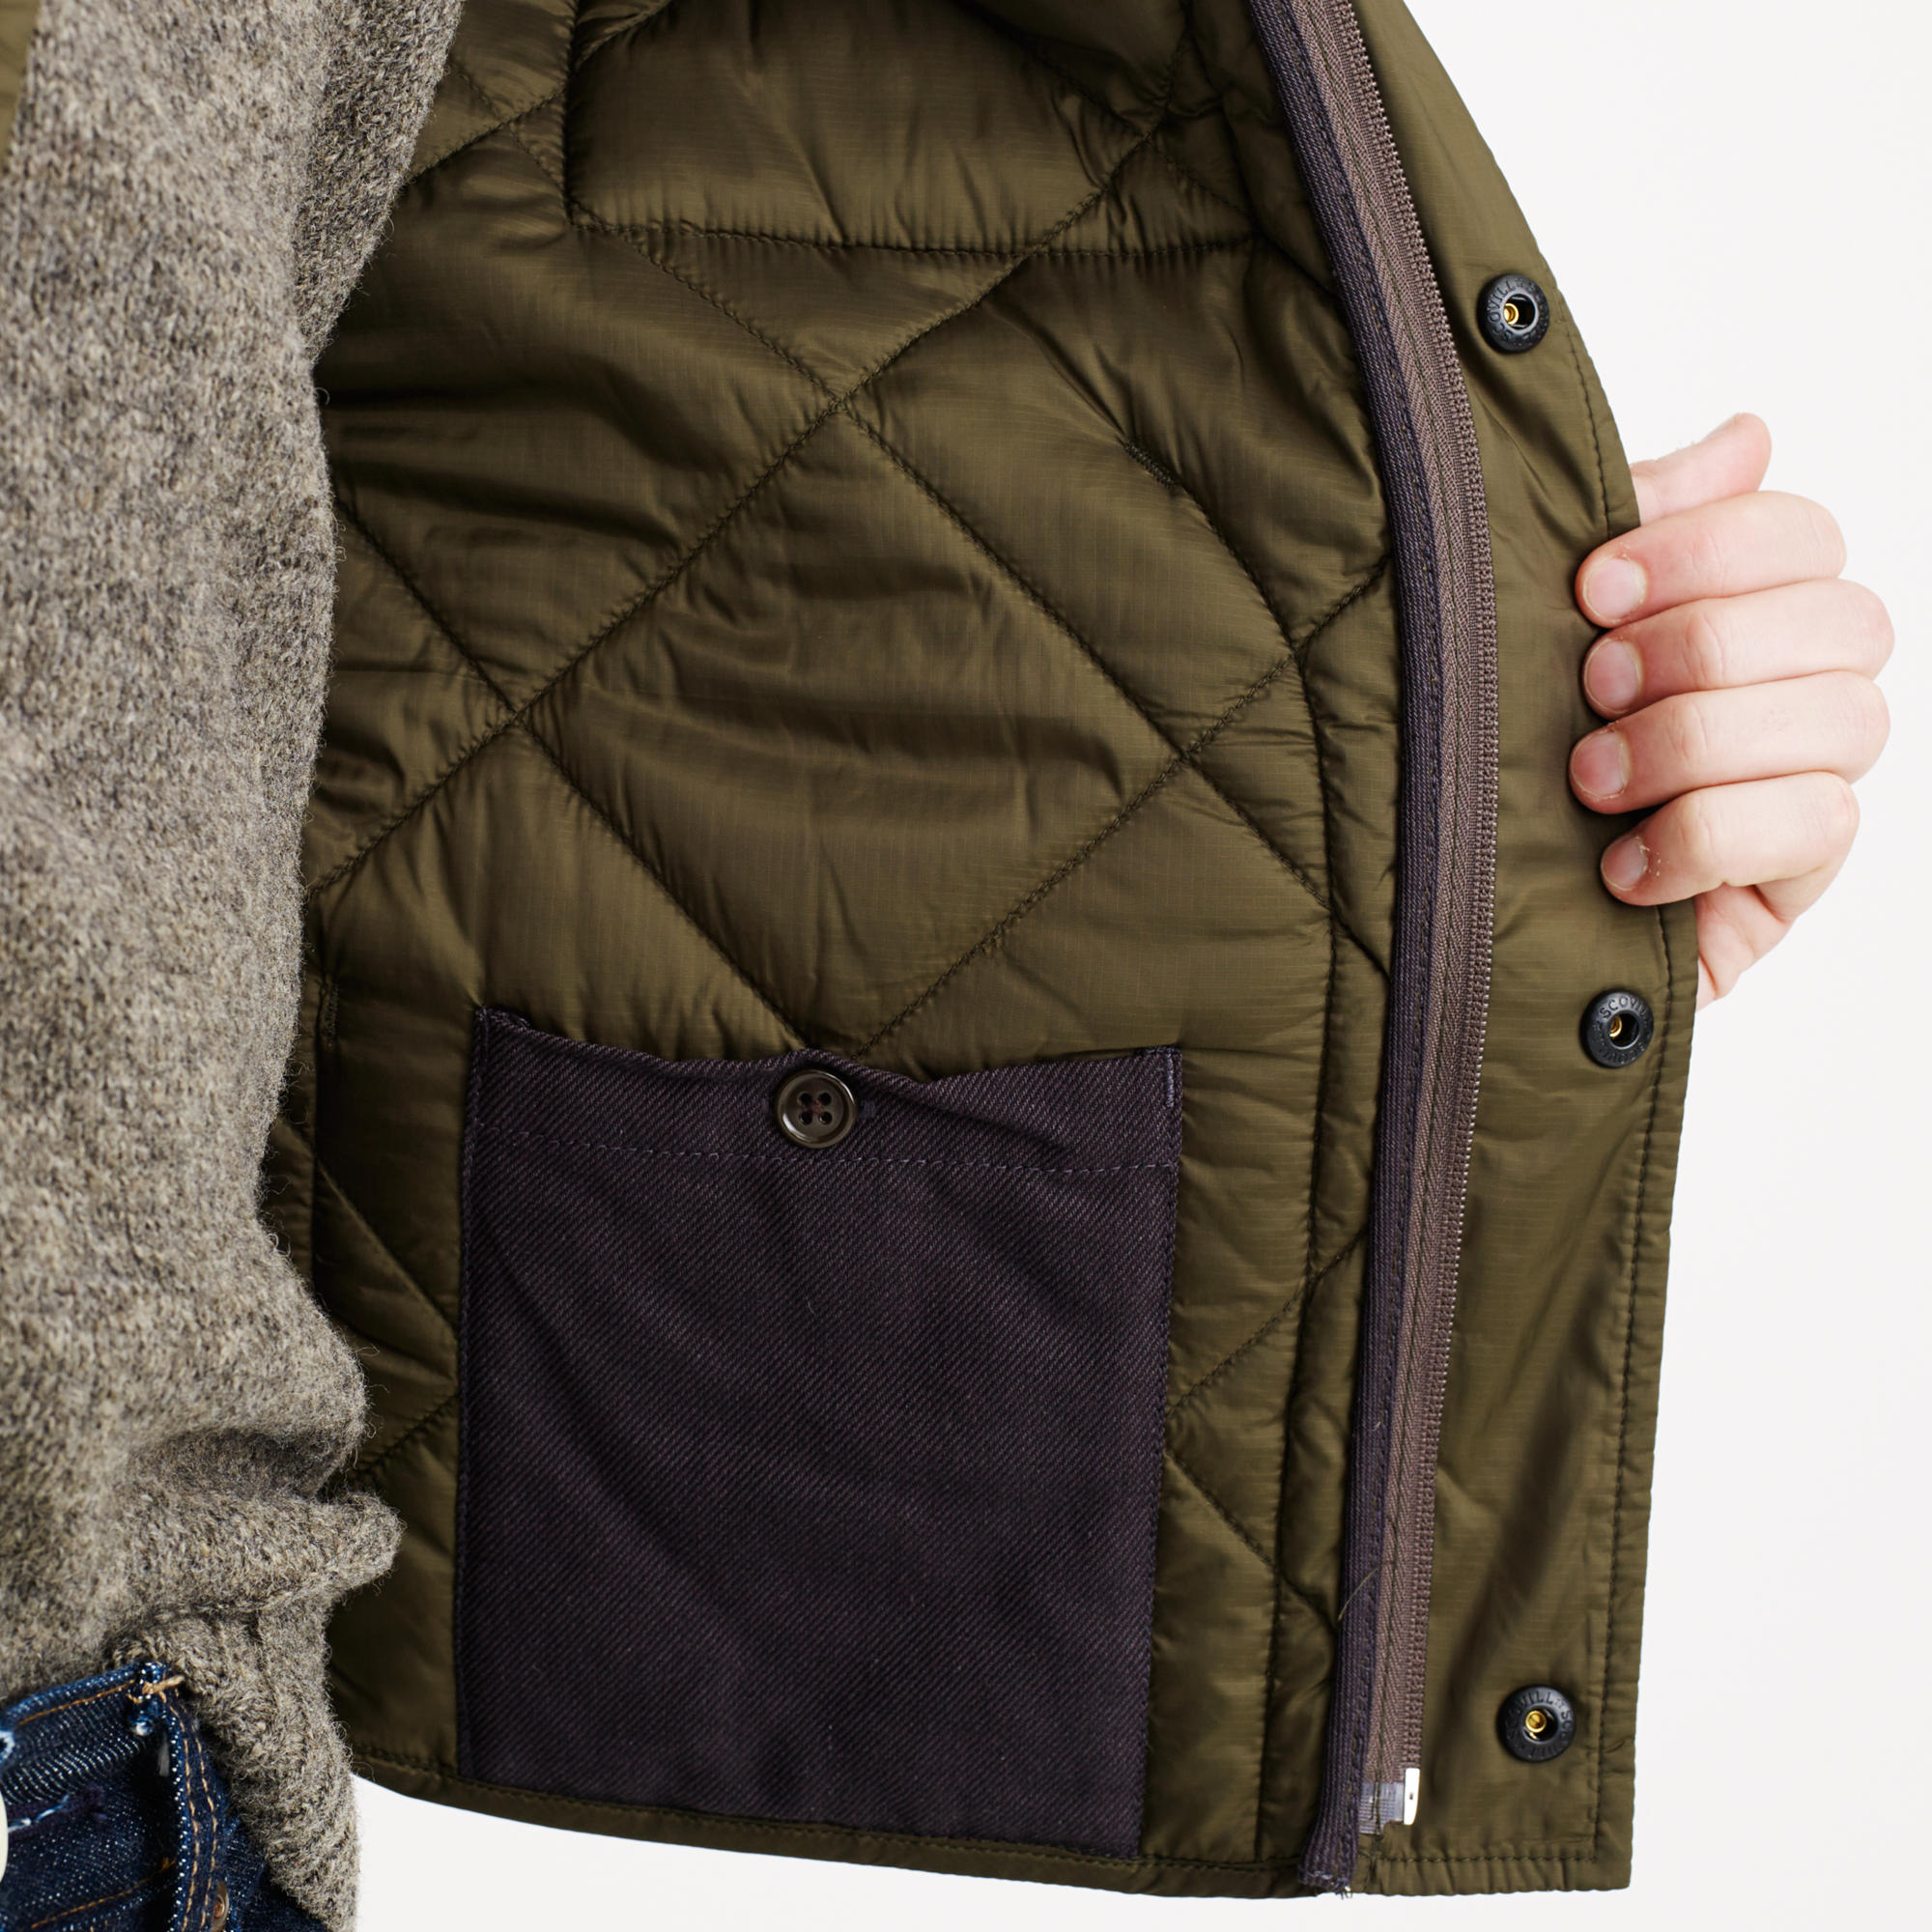 Lyst - J.Crew Nylon Sussex Quilted Vest in Green for Men